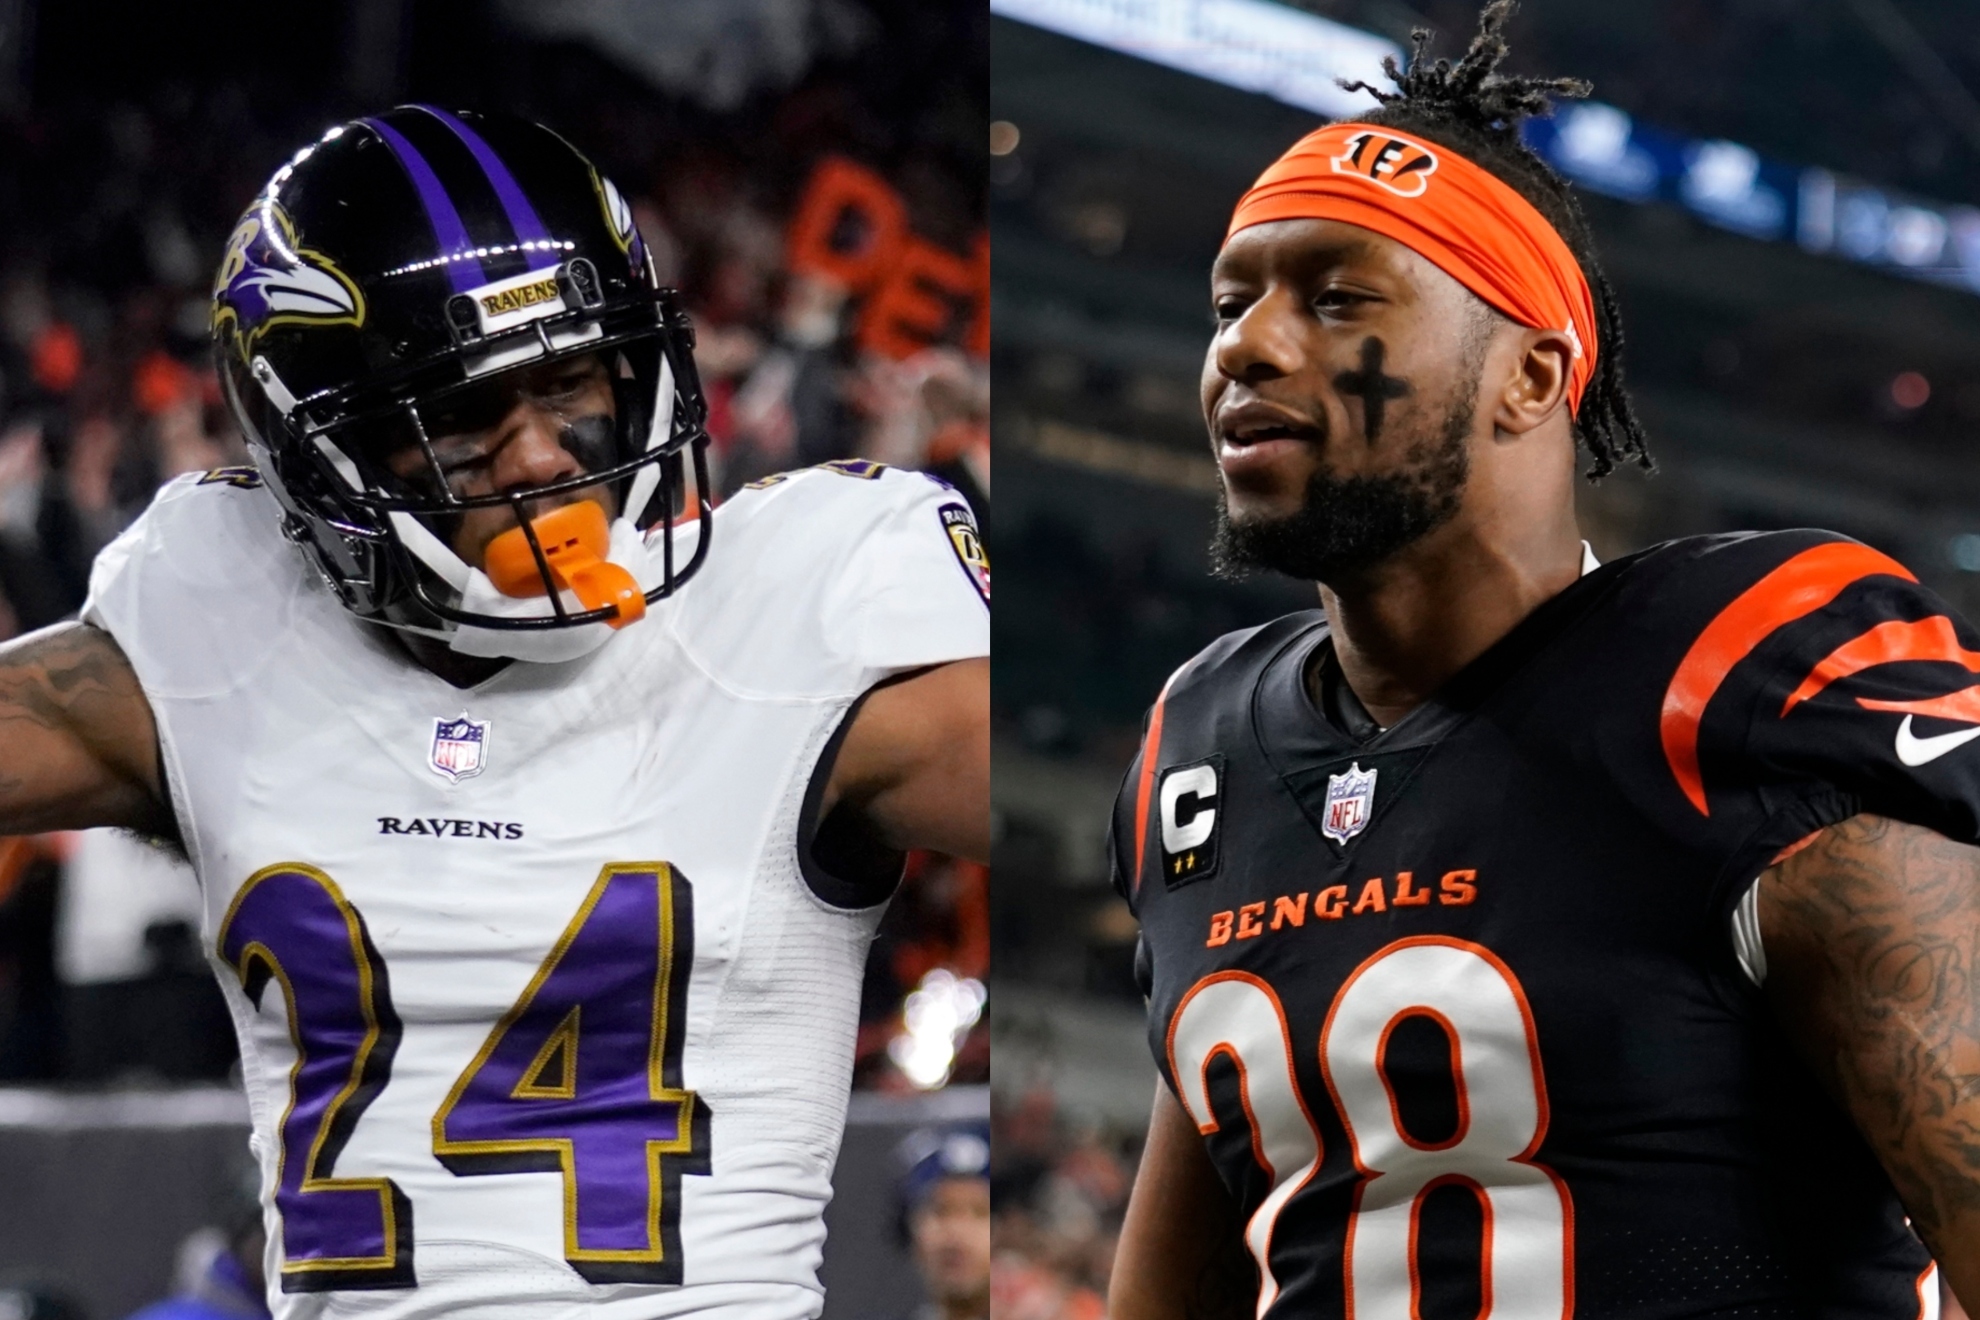 Marcus Peters punched Joe Mixon while on the ground